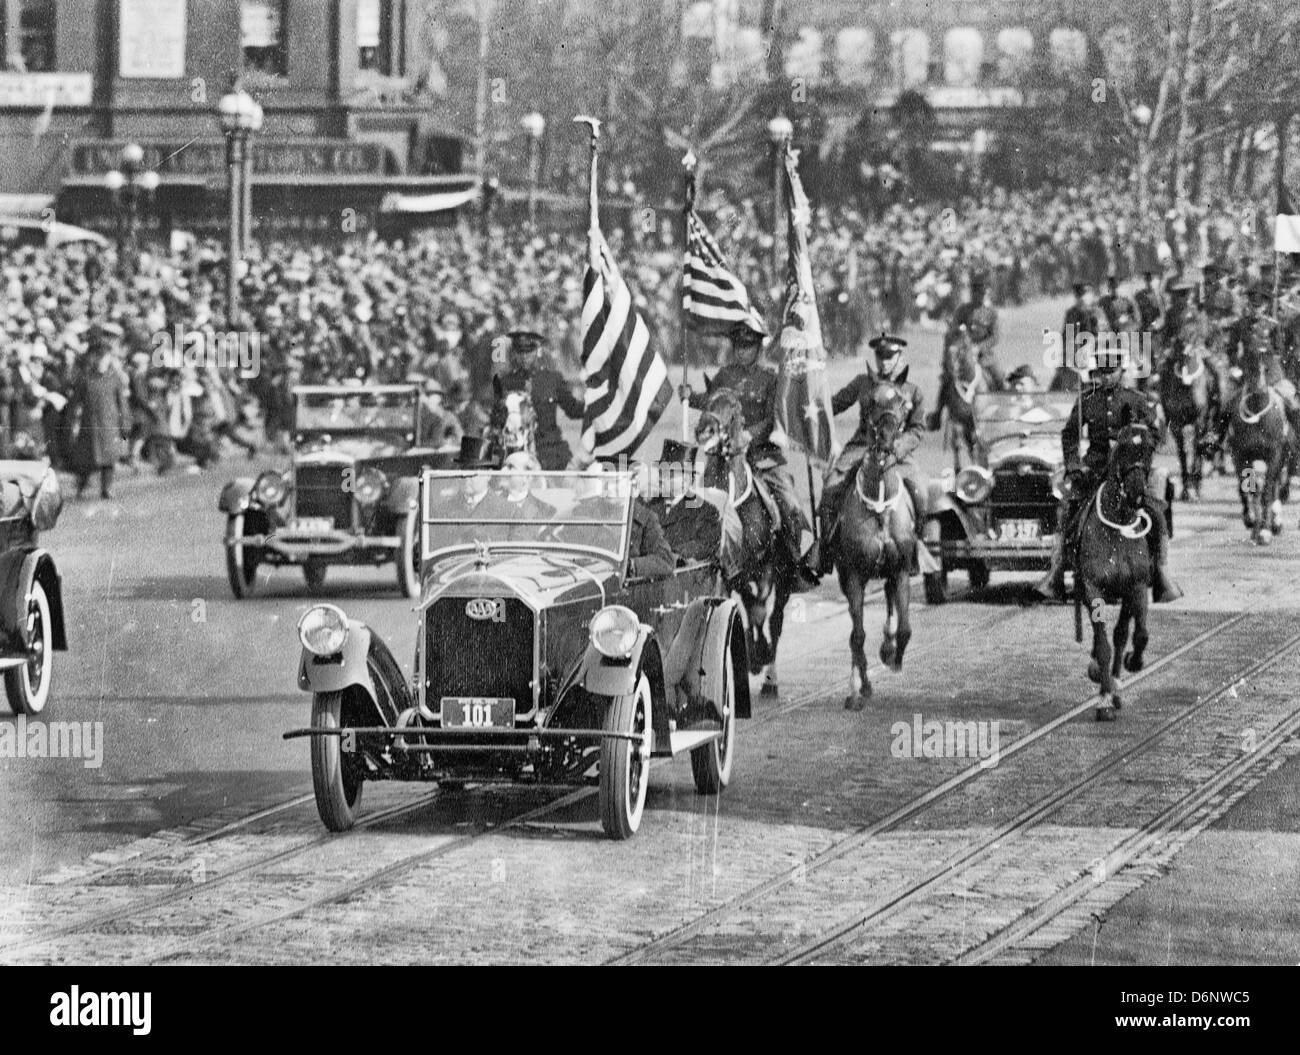 President Coolidge and others riding in a car during the inaugural parade, March 4, 1925 Stock Photo